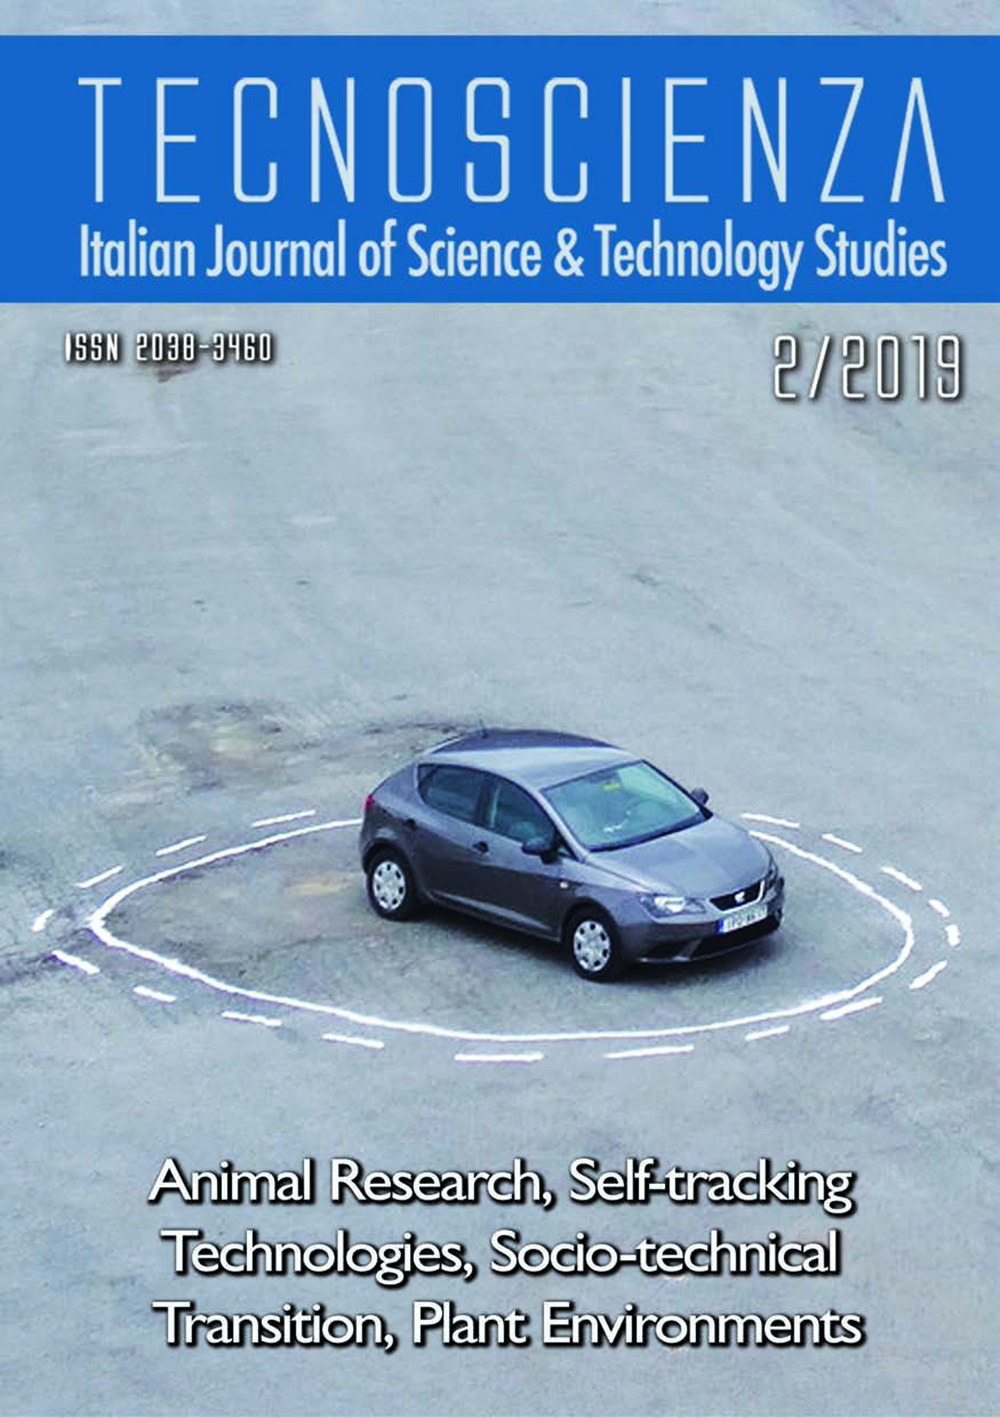 "Autonomous Trap 001" by James Bridle. Cover of Tecnoscienza number 20 (2nd Issue, Year 2019)